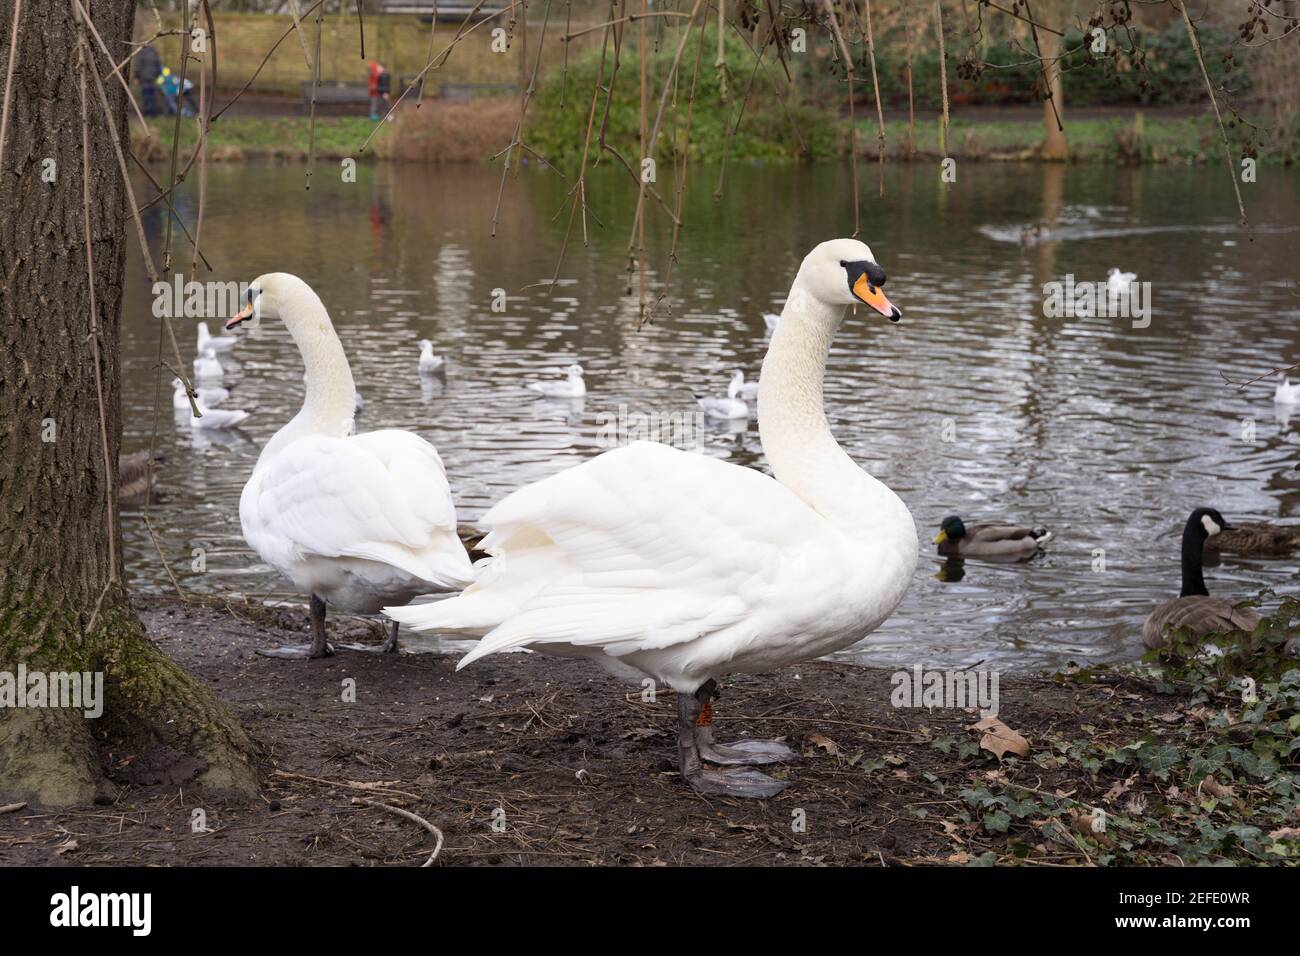 two mute swans standing on pond side ready for preening Stock Photo